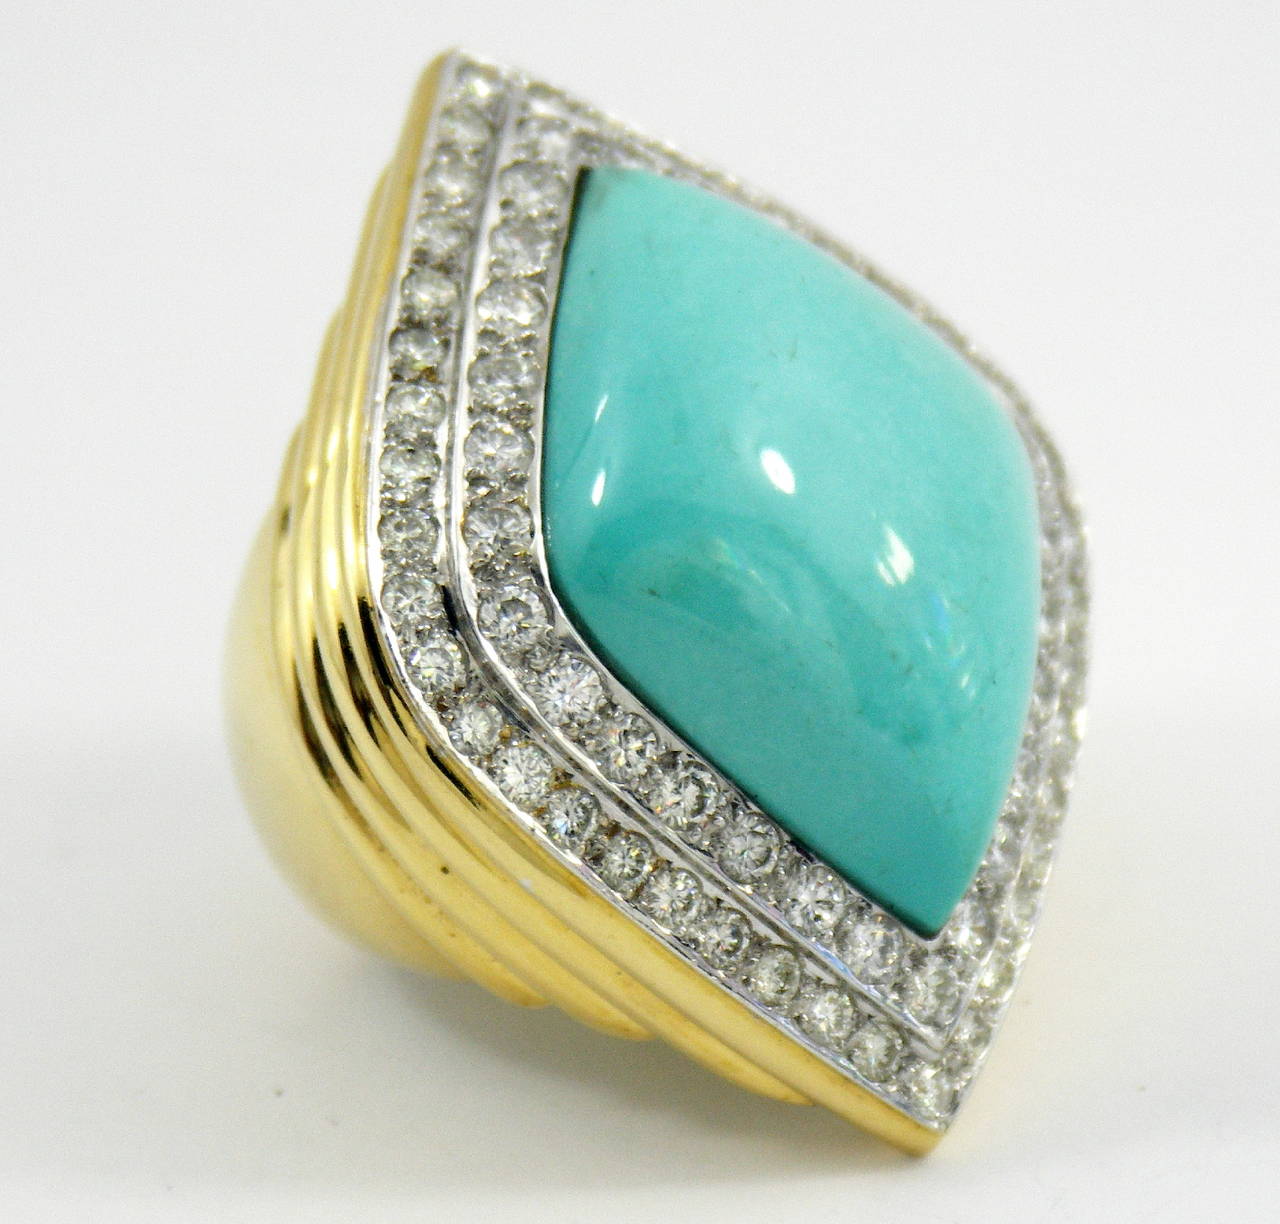 One ladies 18K gold ring, with shoulders beautifully tiered, leading up to a turquoise and diamond top. Beautifully pave' set with 68 round brilliant cut diamonds, totaling approximately 5ct, they surround the navette shaped, cabochon turquoise,